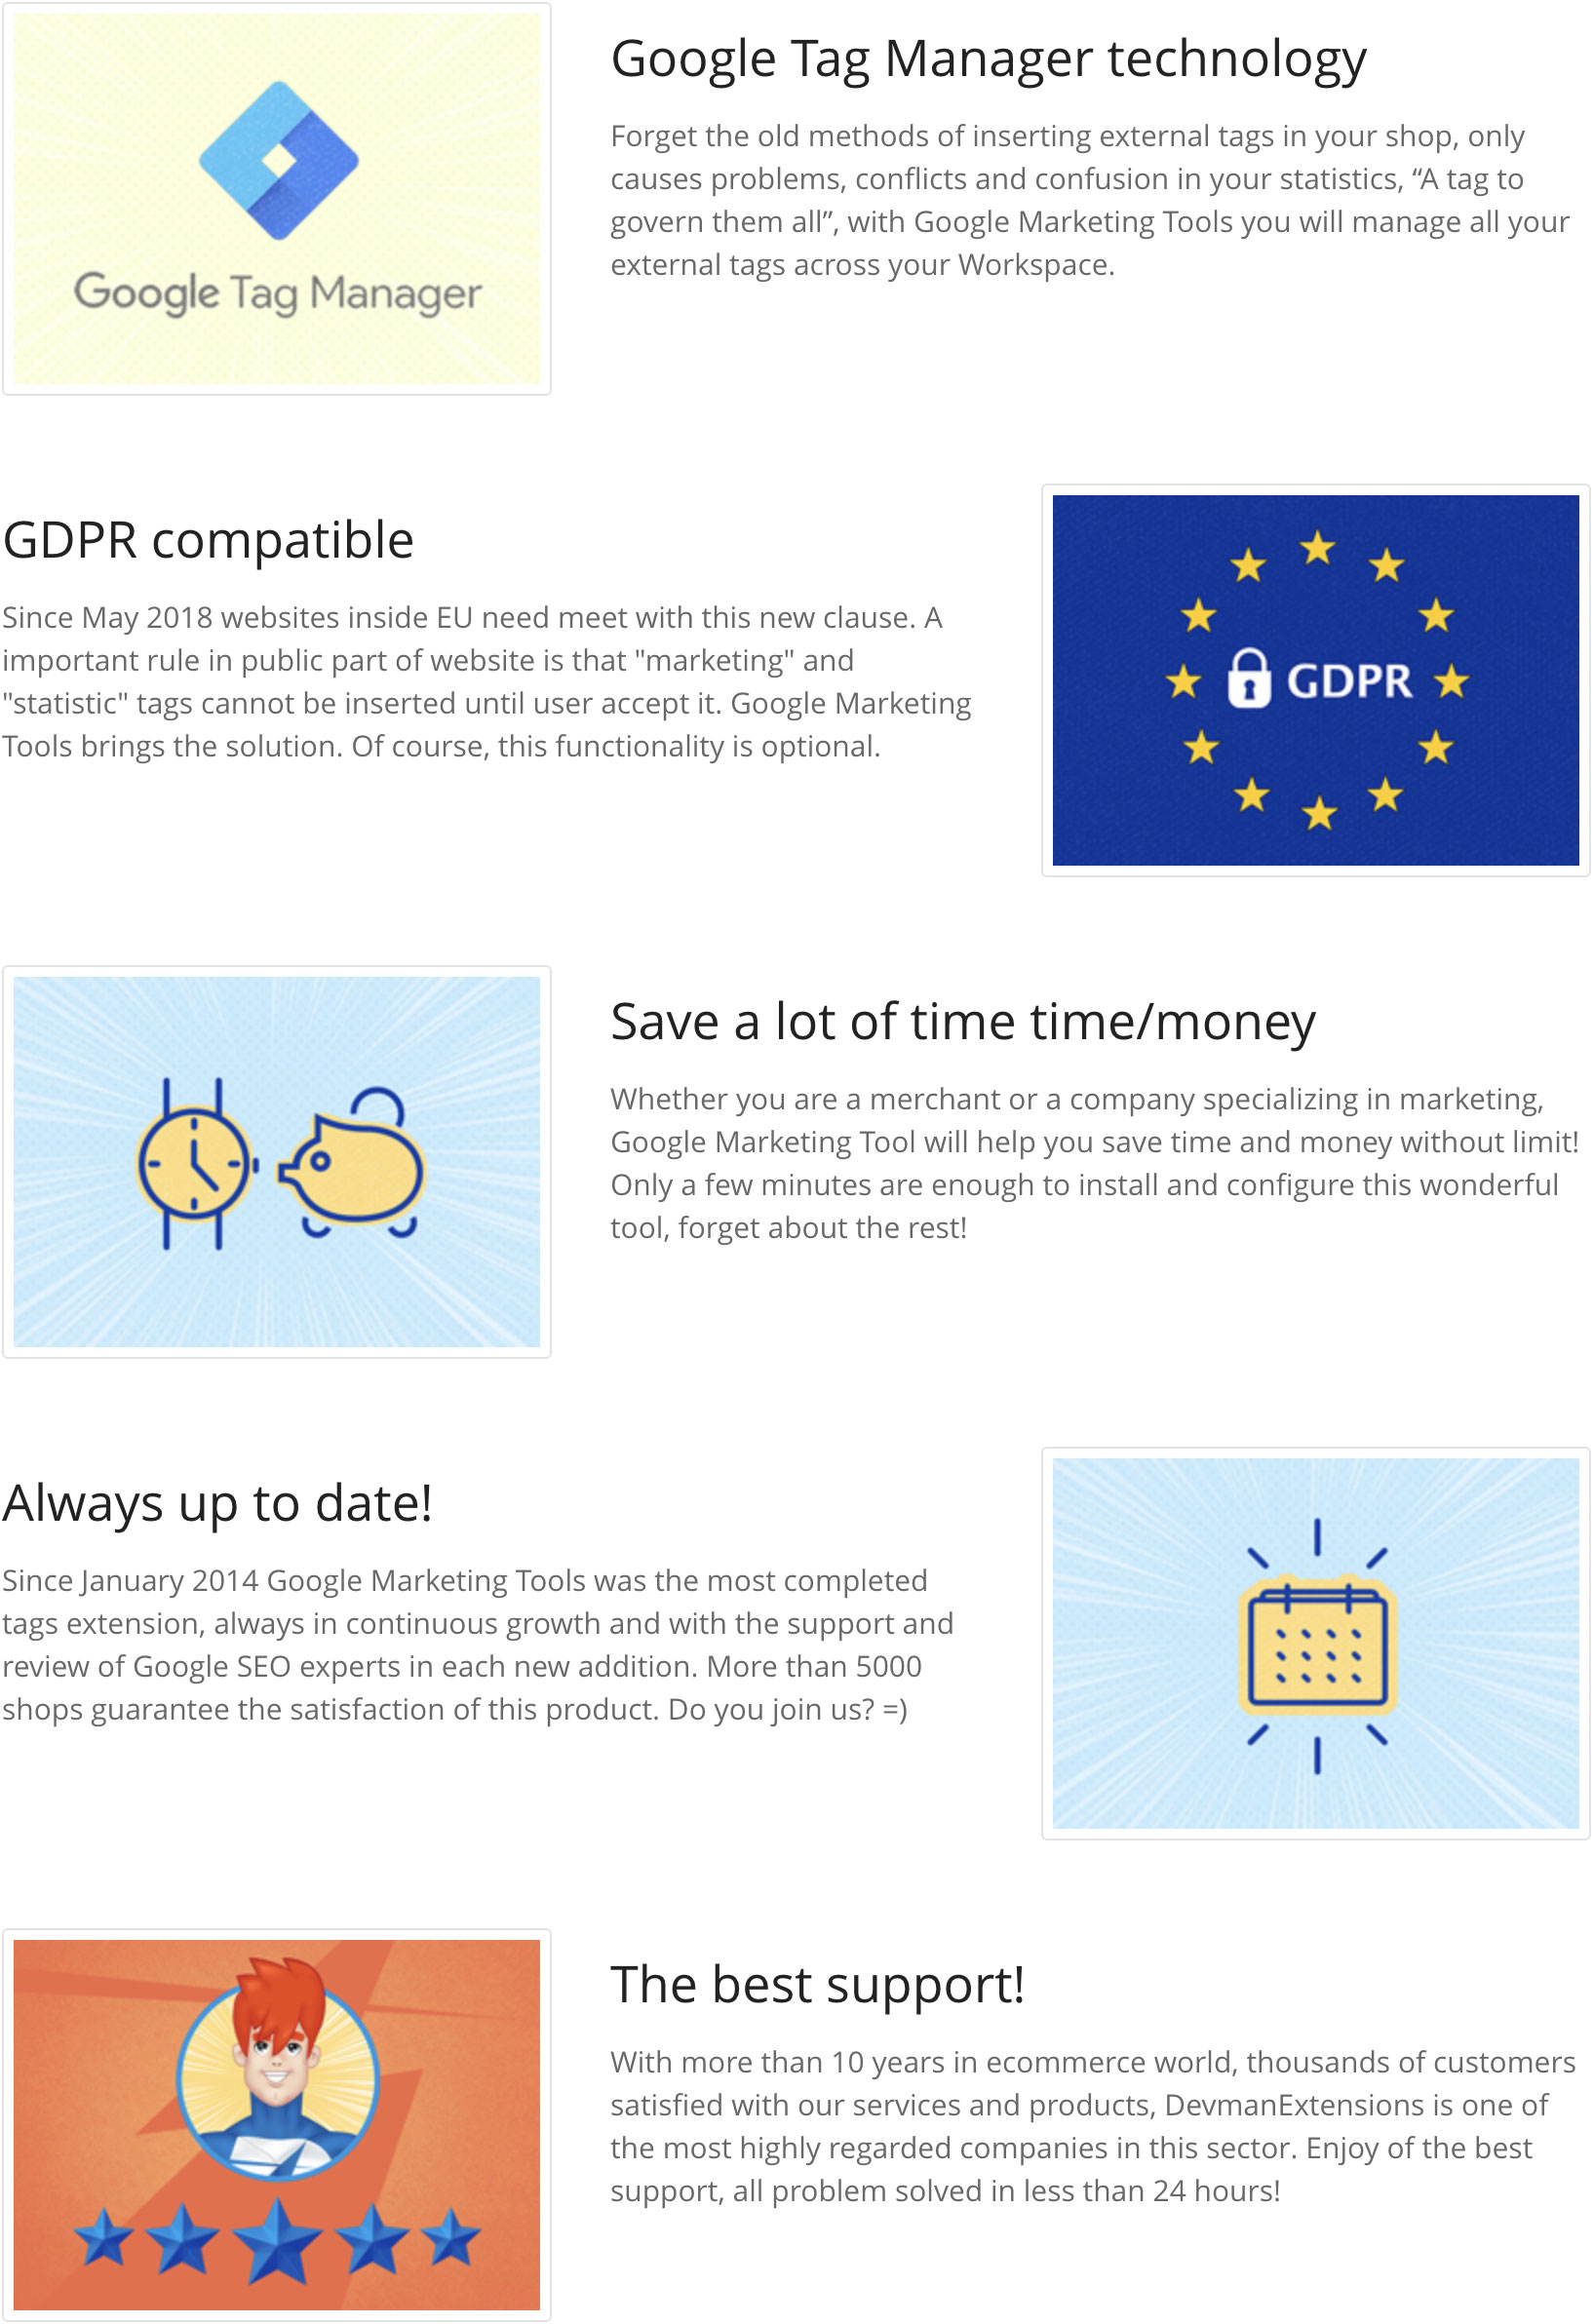 Google Marketing Tools - The most complete marketing tool to Woocommerce! GDPR adapted! - 4